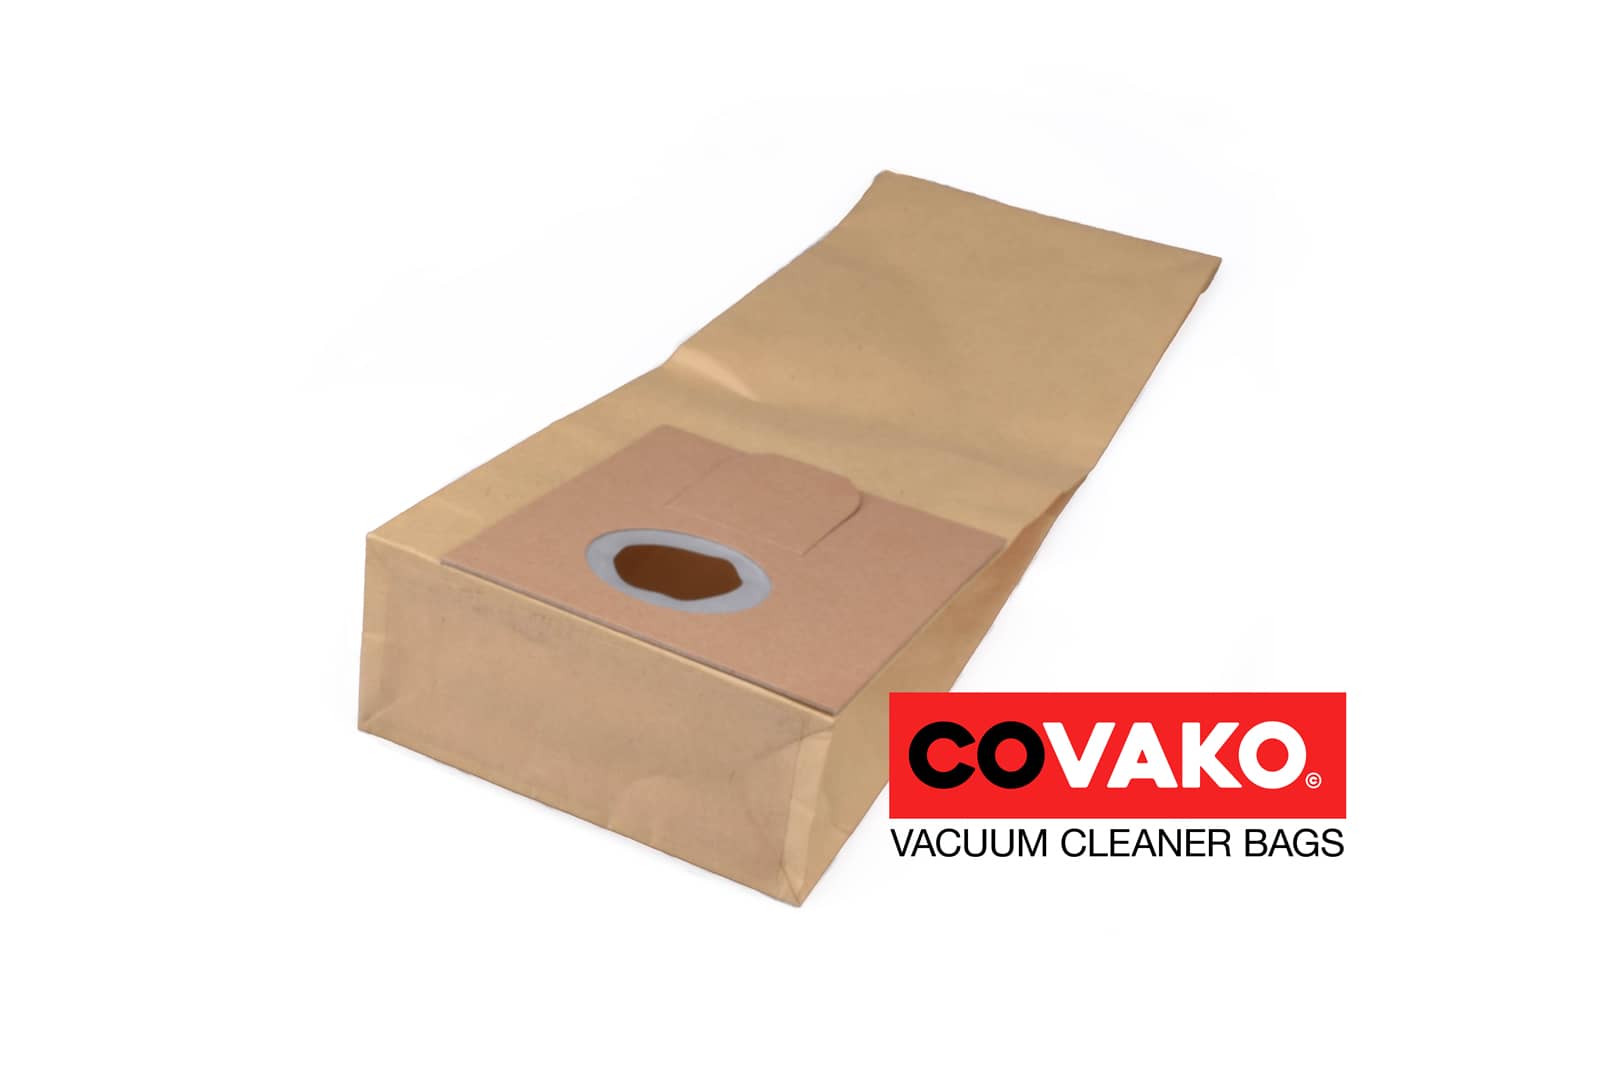 Oehme Otto Compacto UP350 / Paper - Oehme Otto vacuum cleaner bags